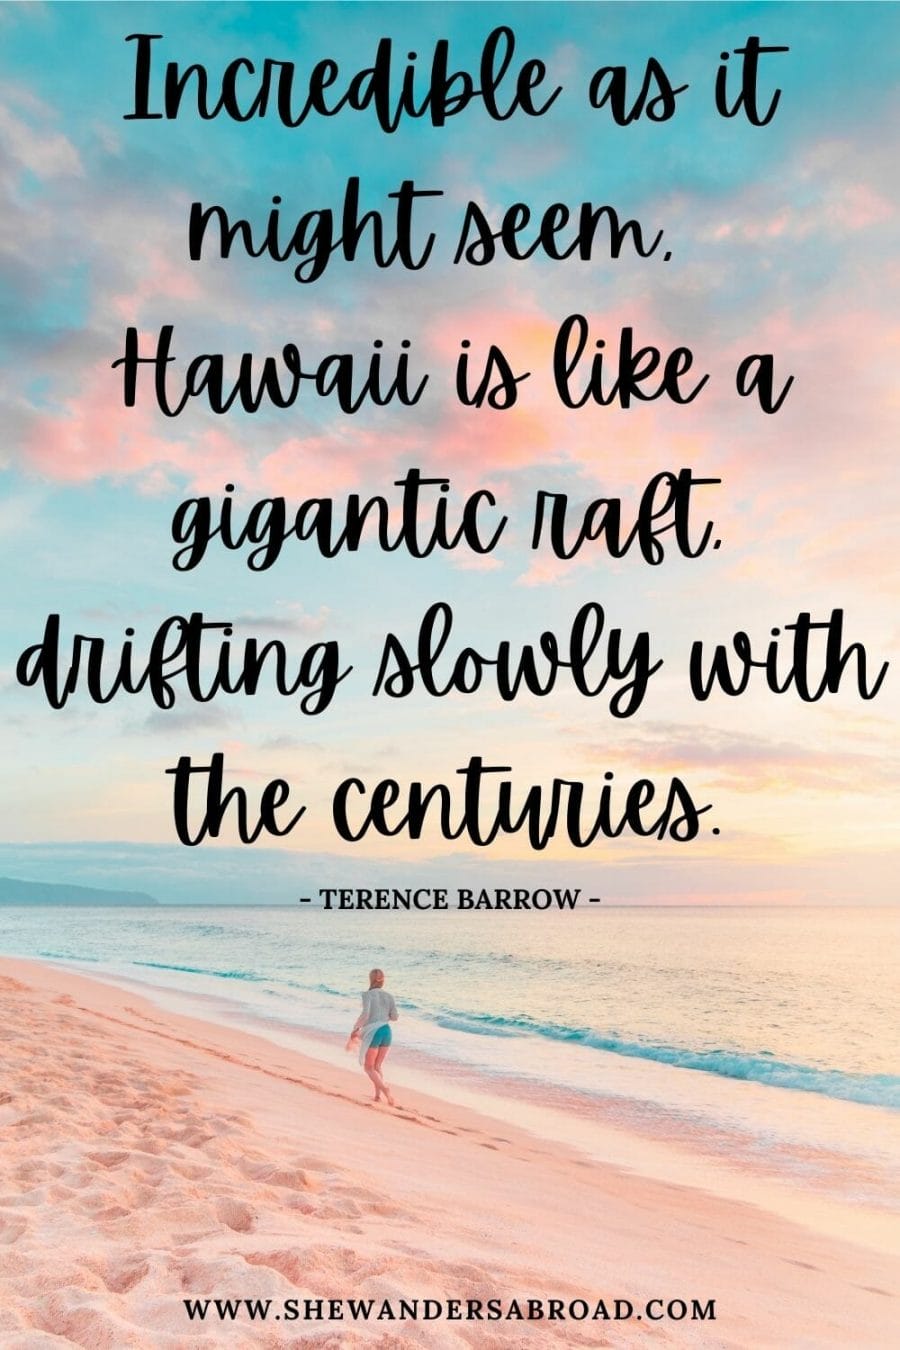 Famous Hawaii Quotes for Instagram